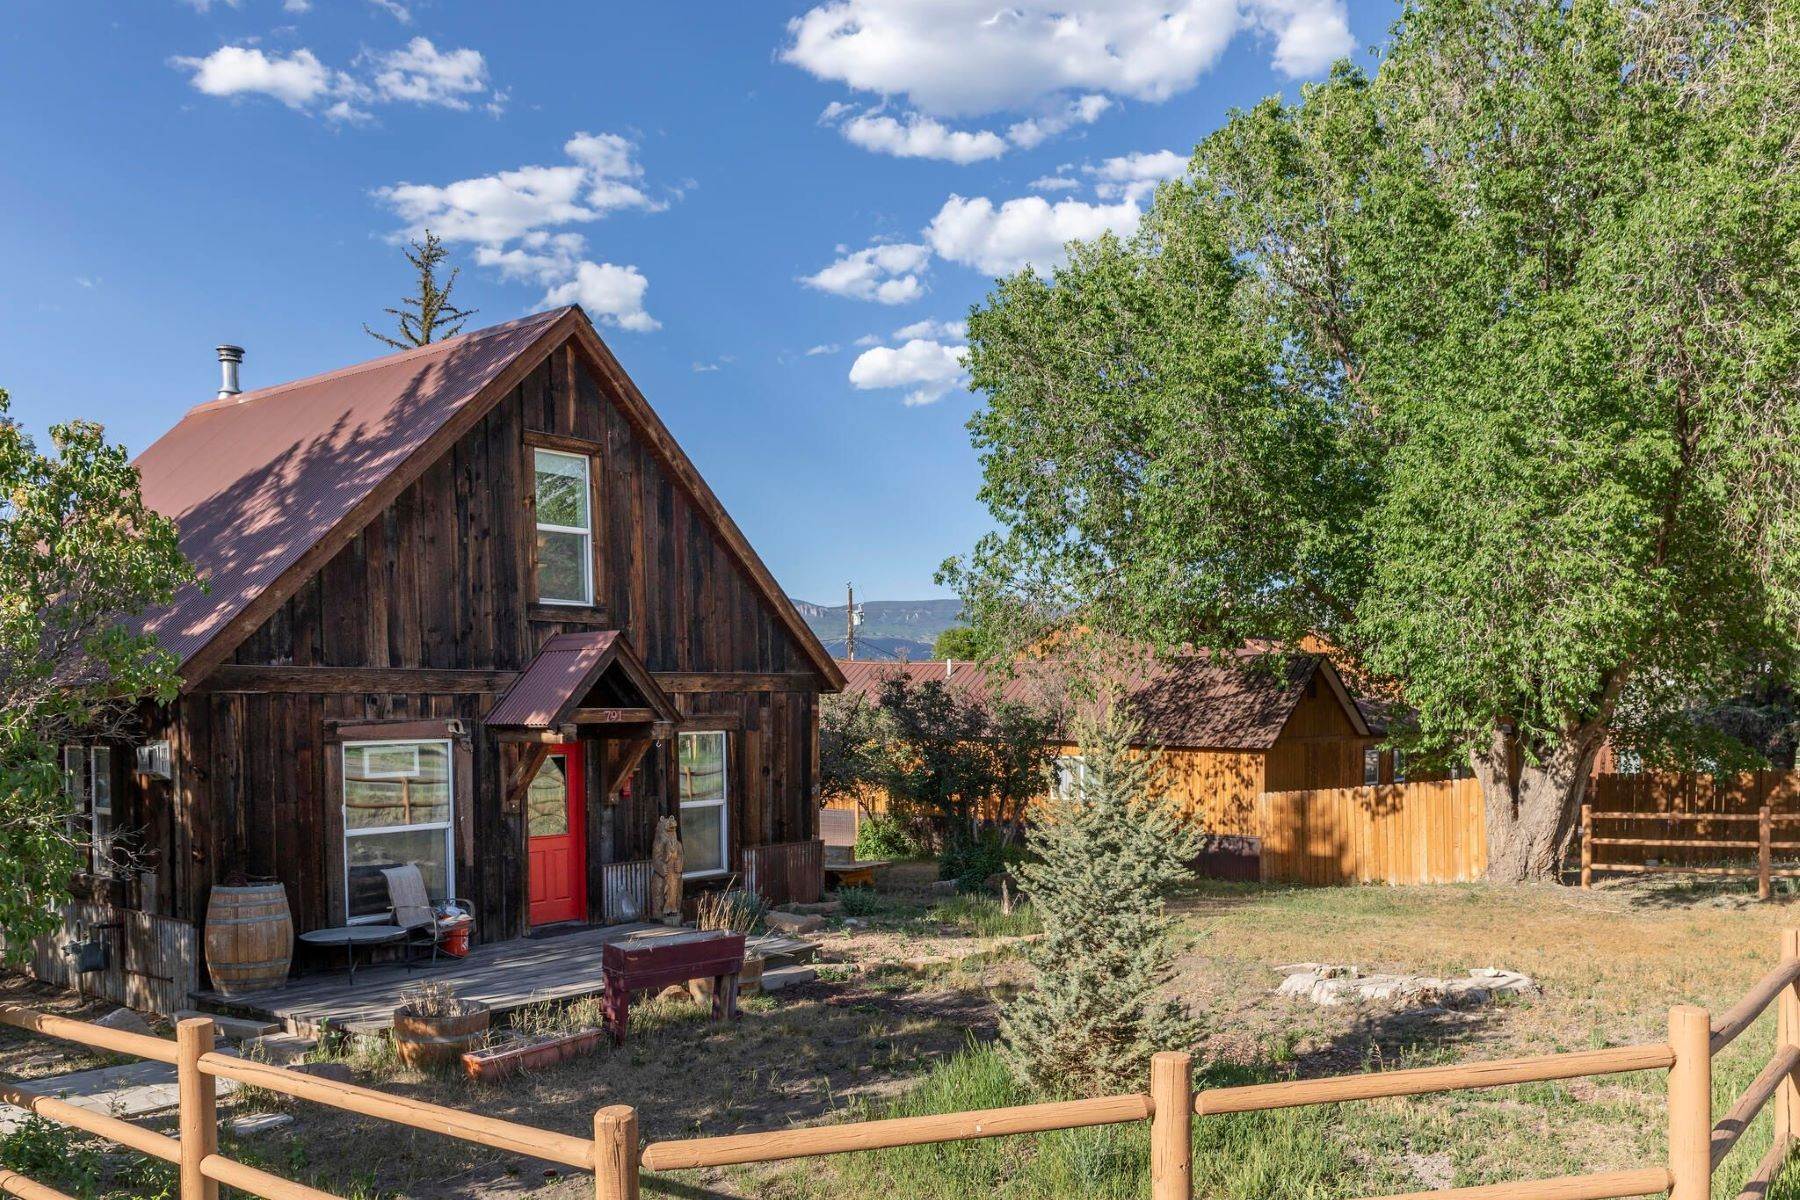 Property for Active at 791 Sherman Street, Ridgway, CO, 81432 791 Sherman Street Ridgway, Colorado 81432 United States